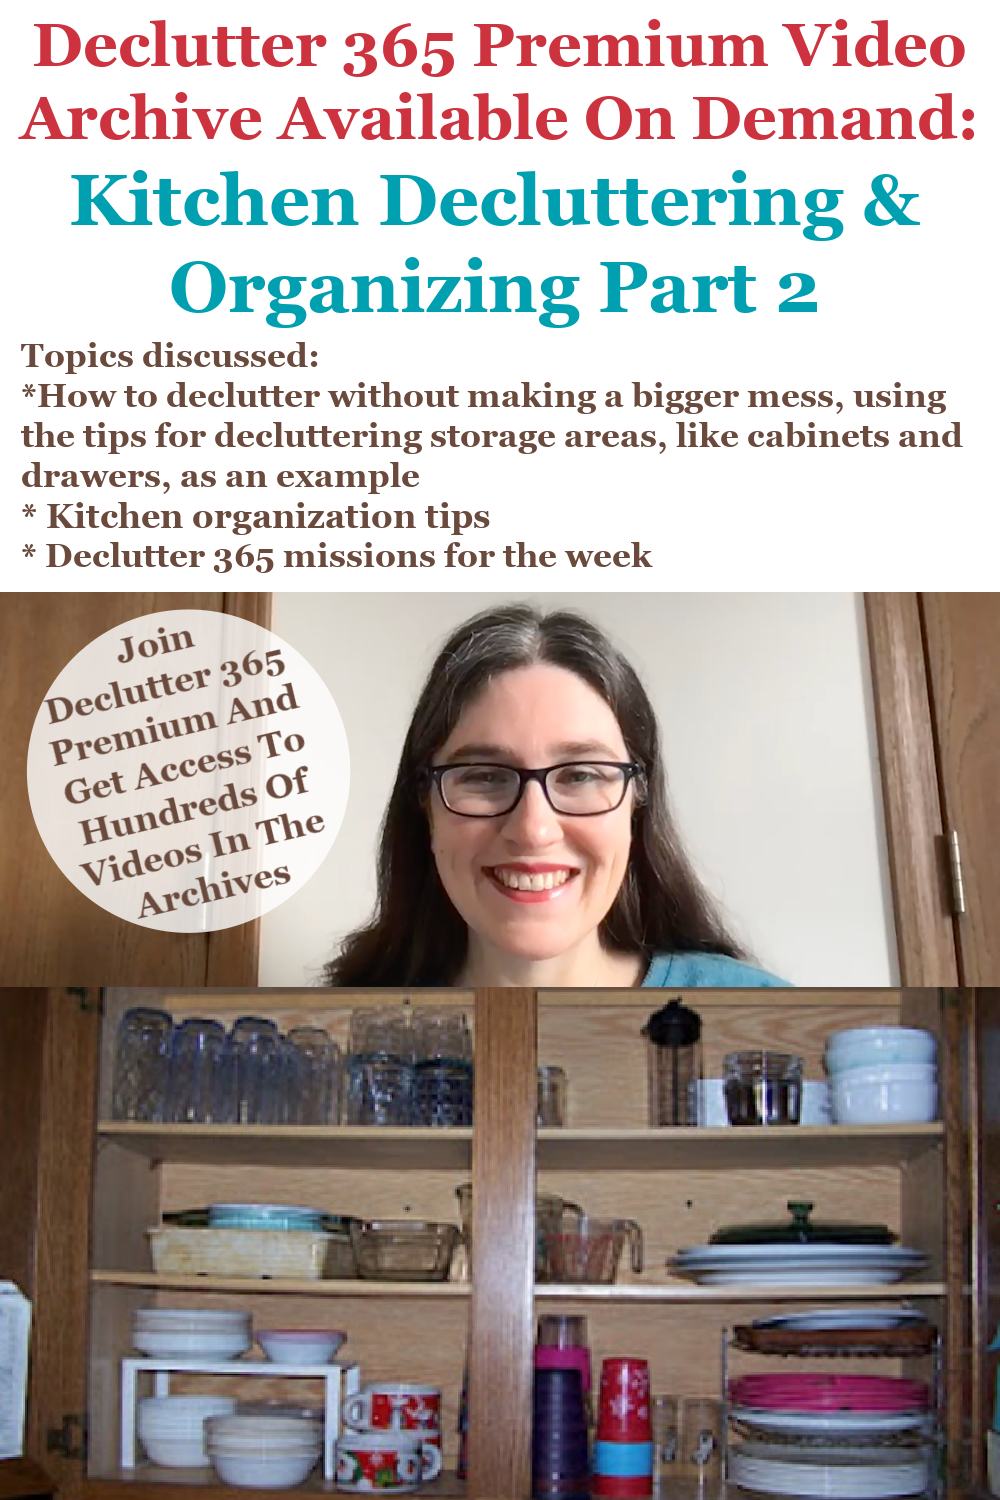 Organization Ideas for the Home, Topics